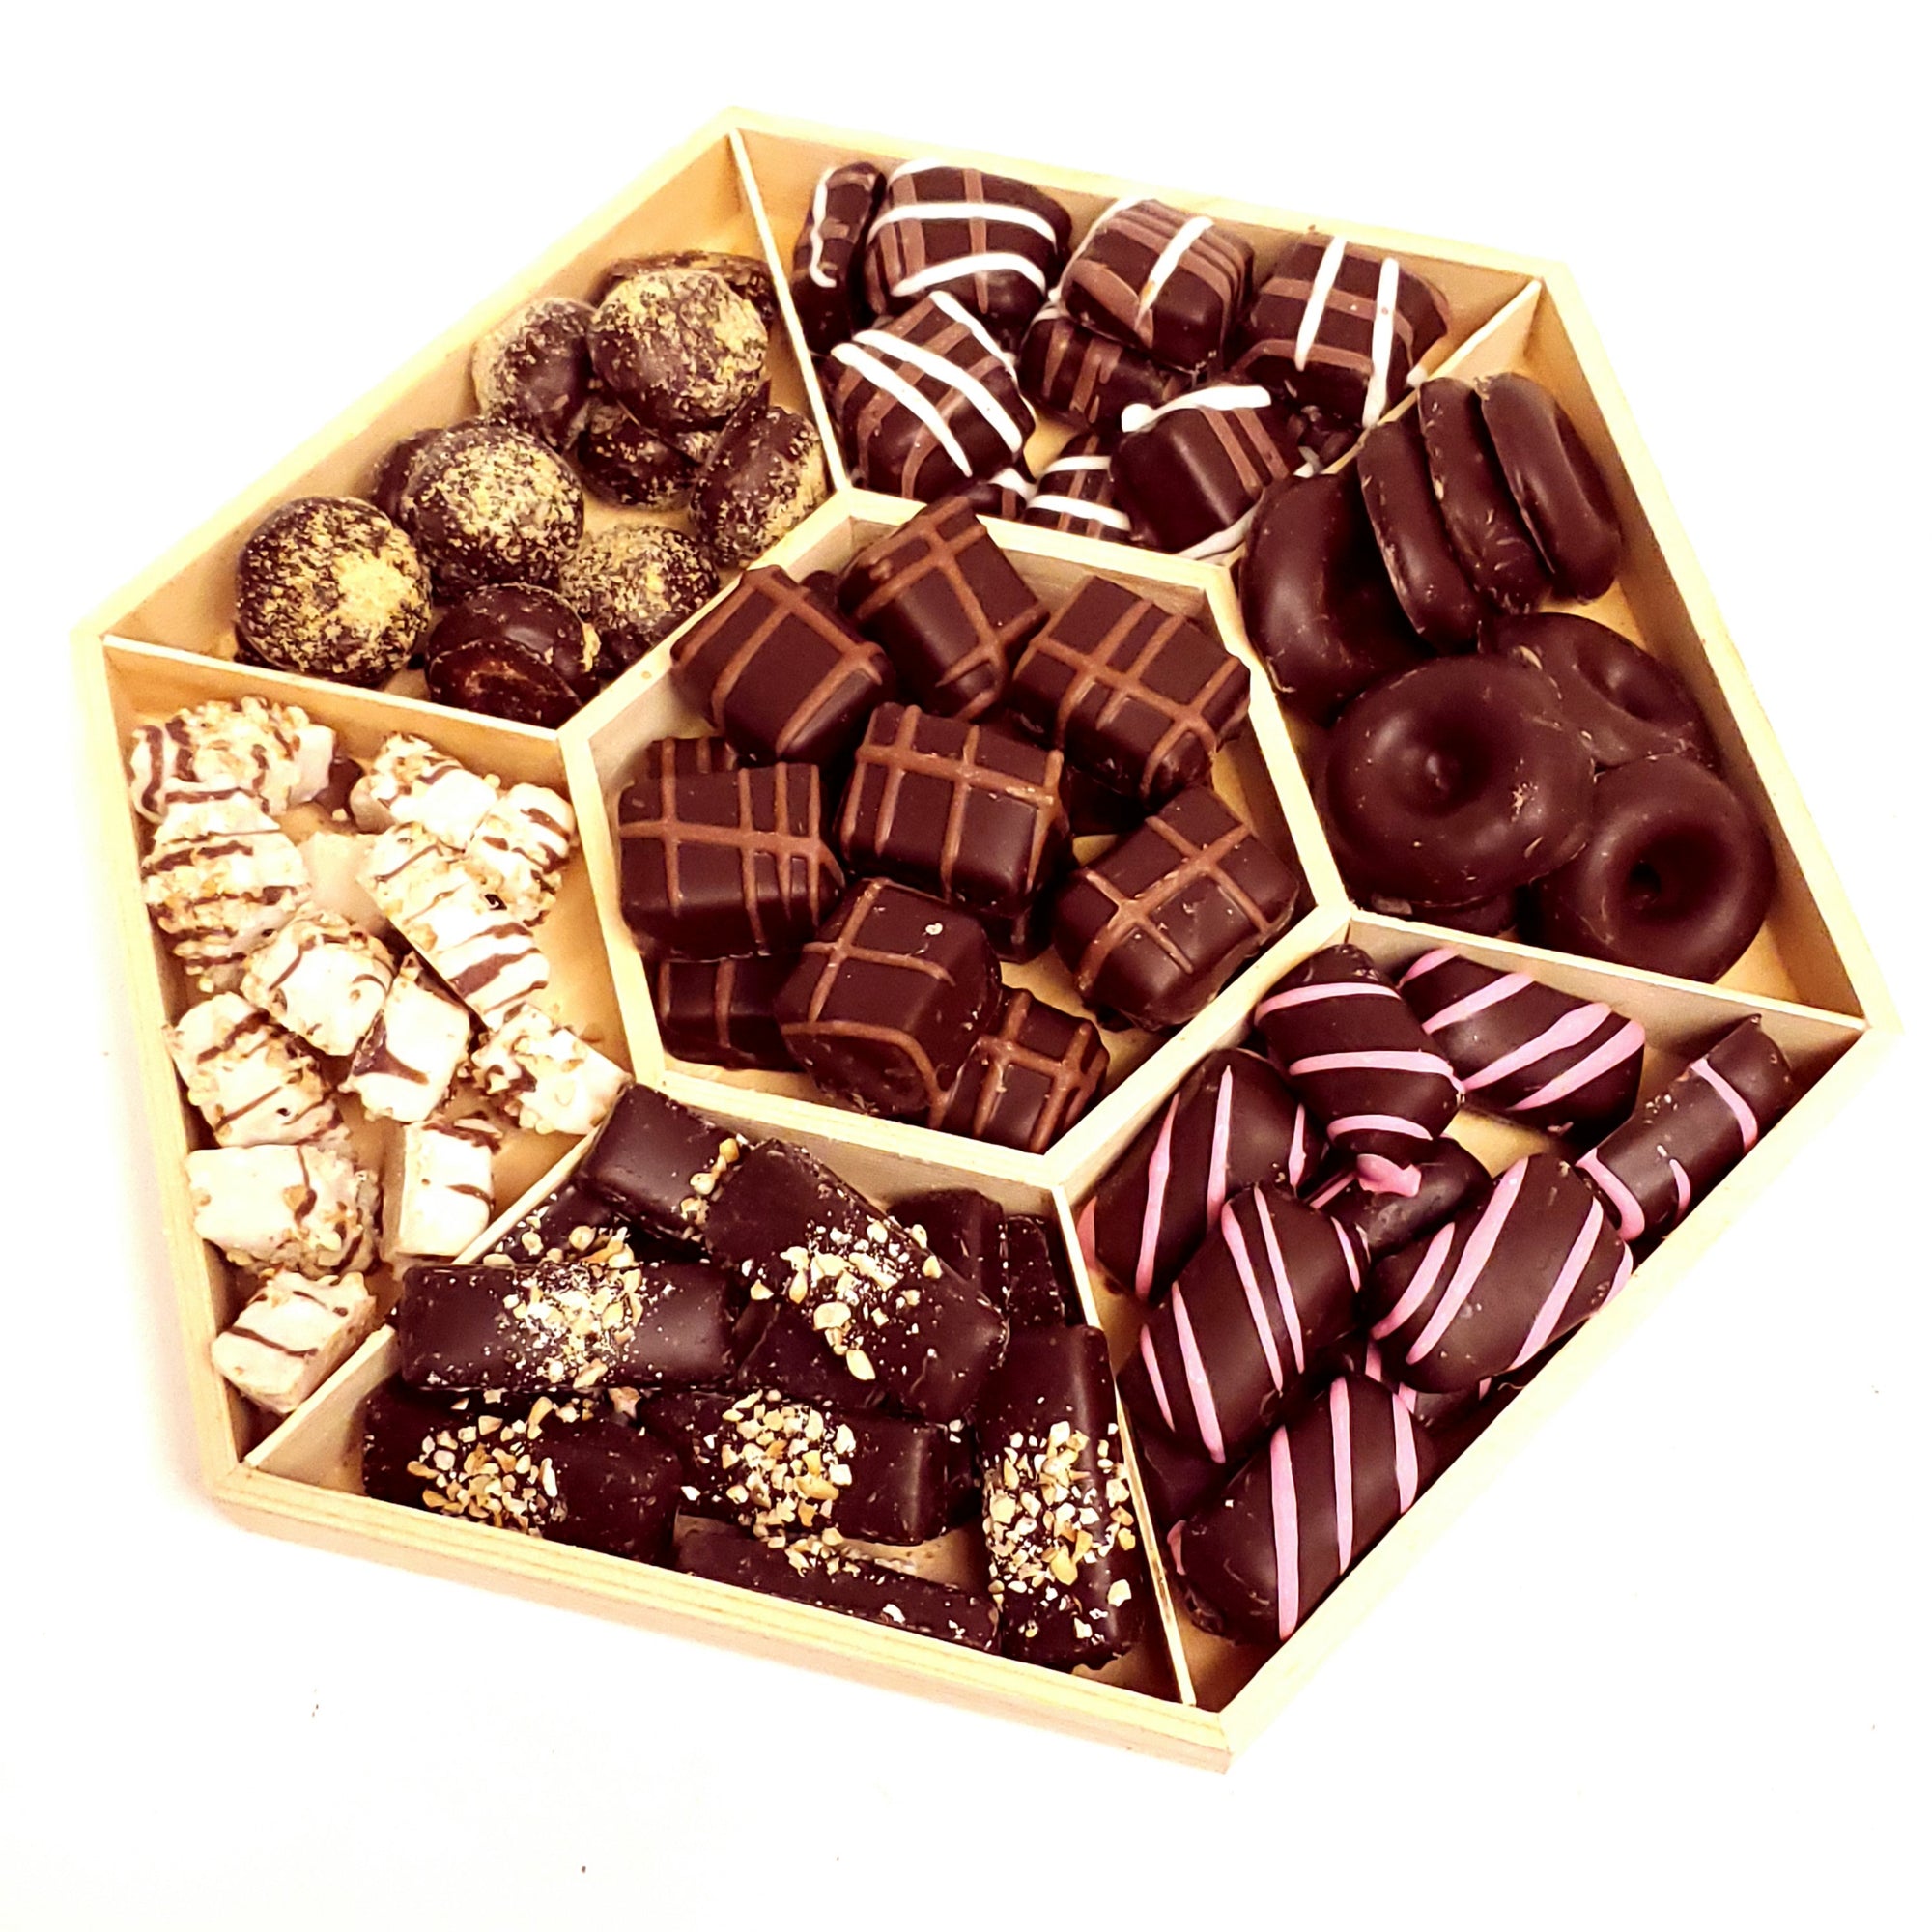 7 SECTION WOOD CHOCOLATE GIFT ARRANGMENT